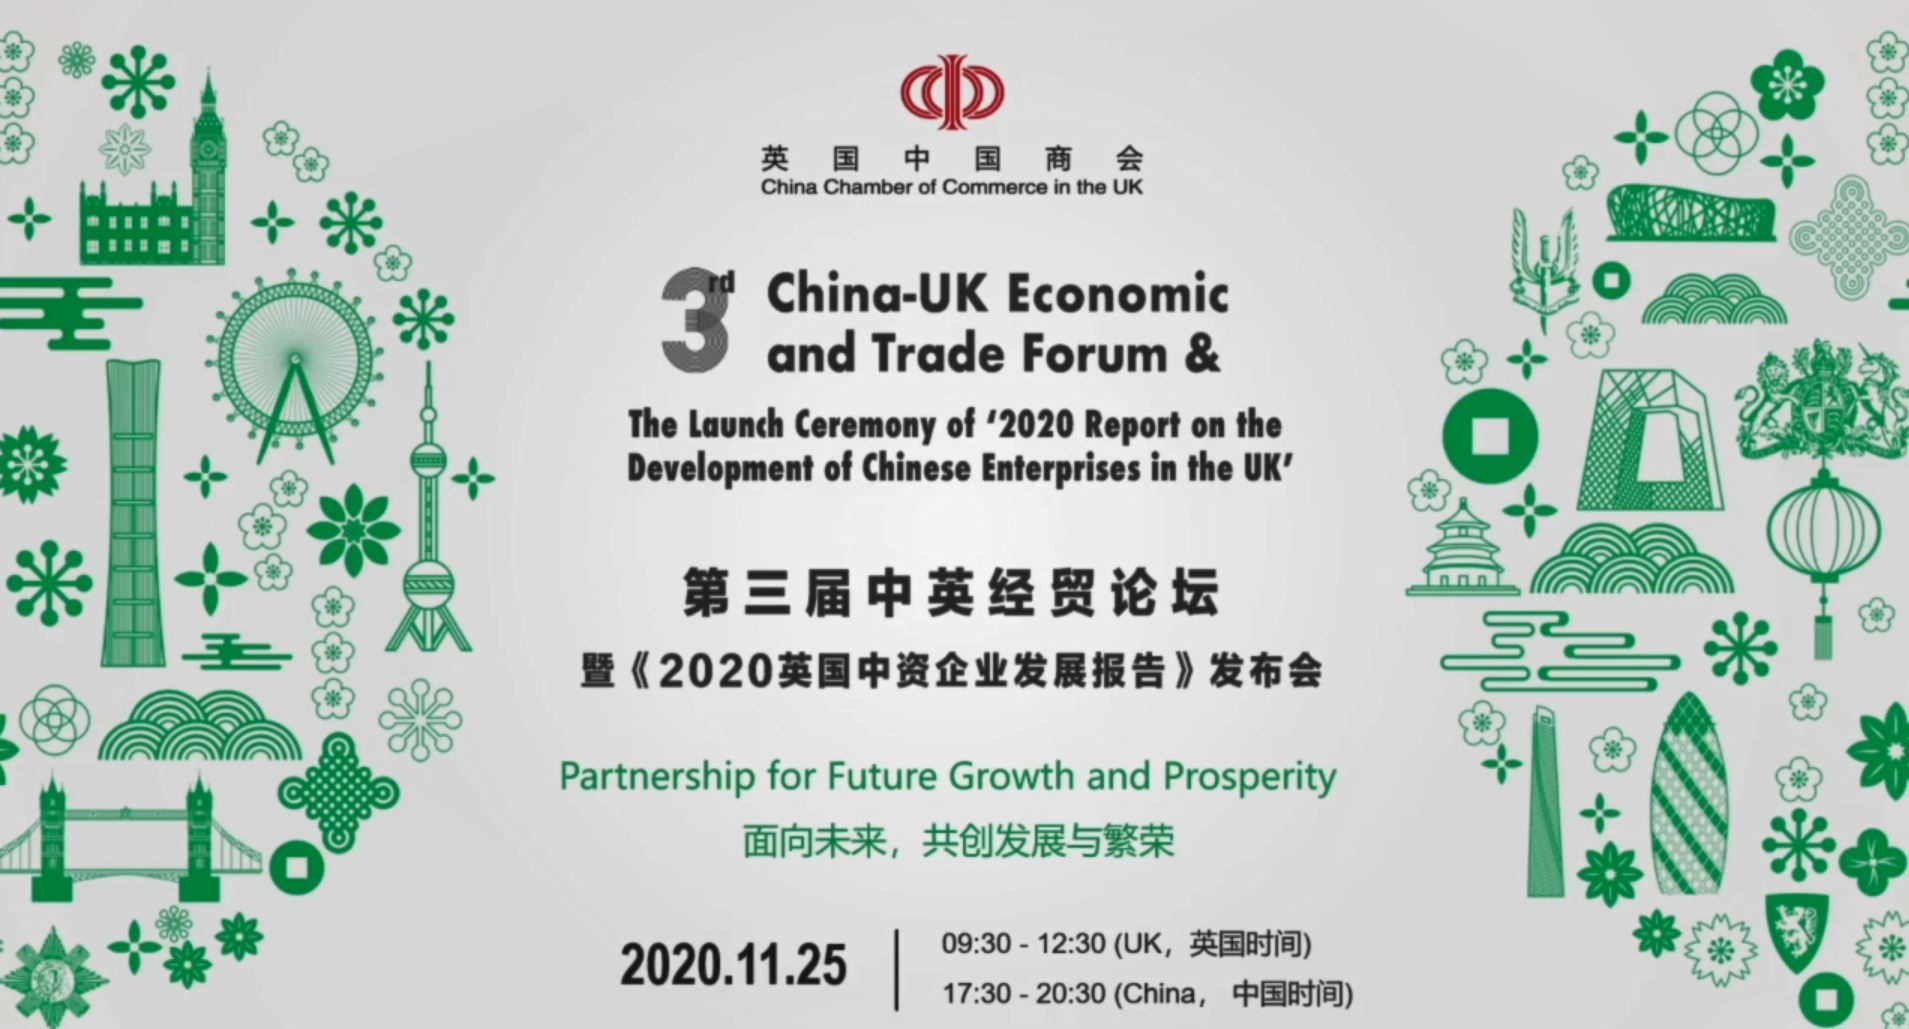 The 3rd China-UK Economic and Trade Forum & The Launch Ceremony of '2020 Report on the Development of Chinese Enterprises in the UK'